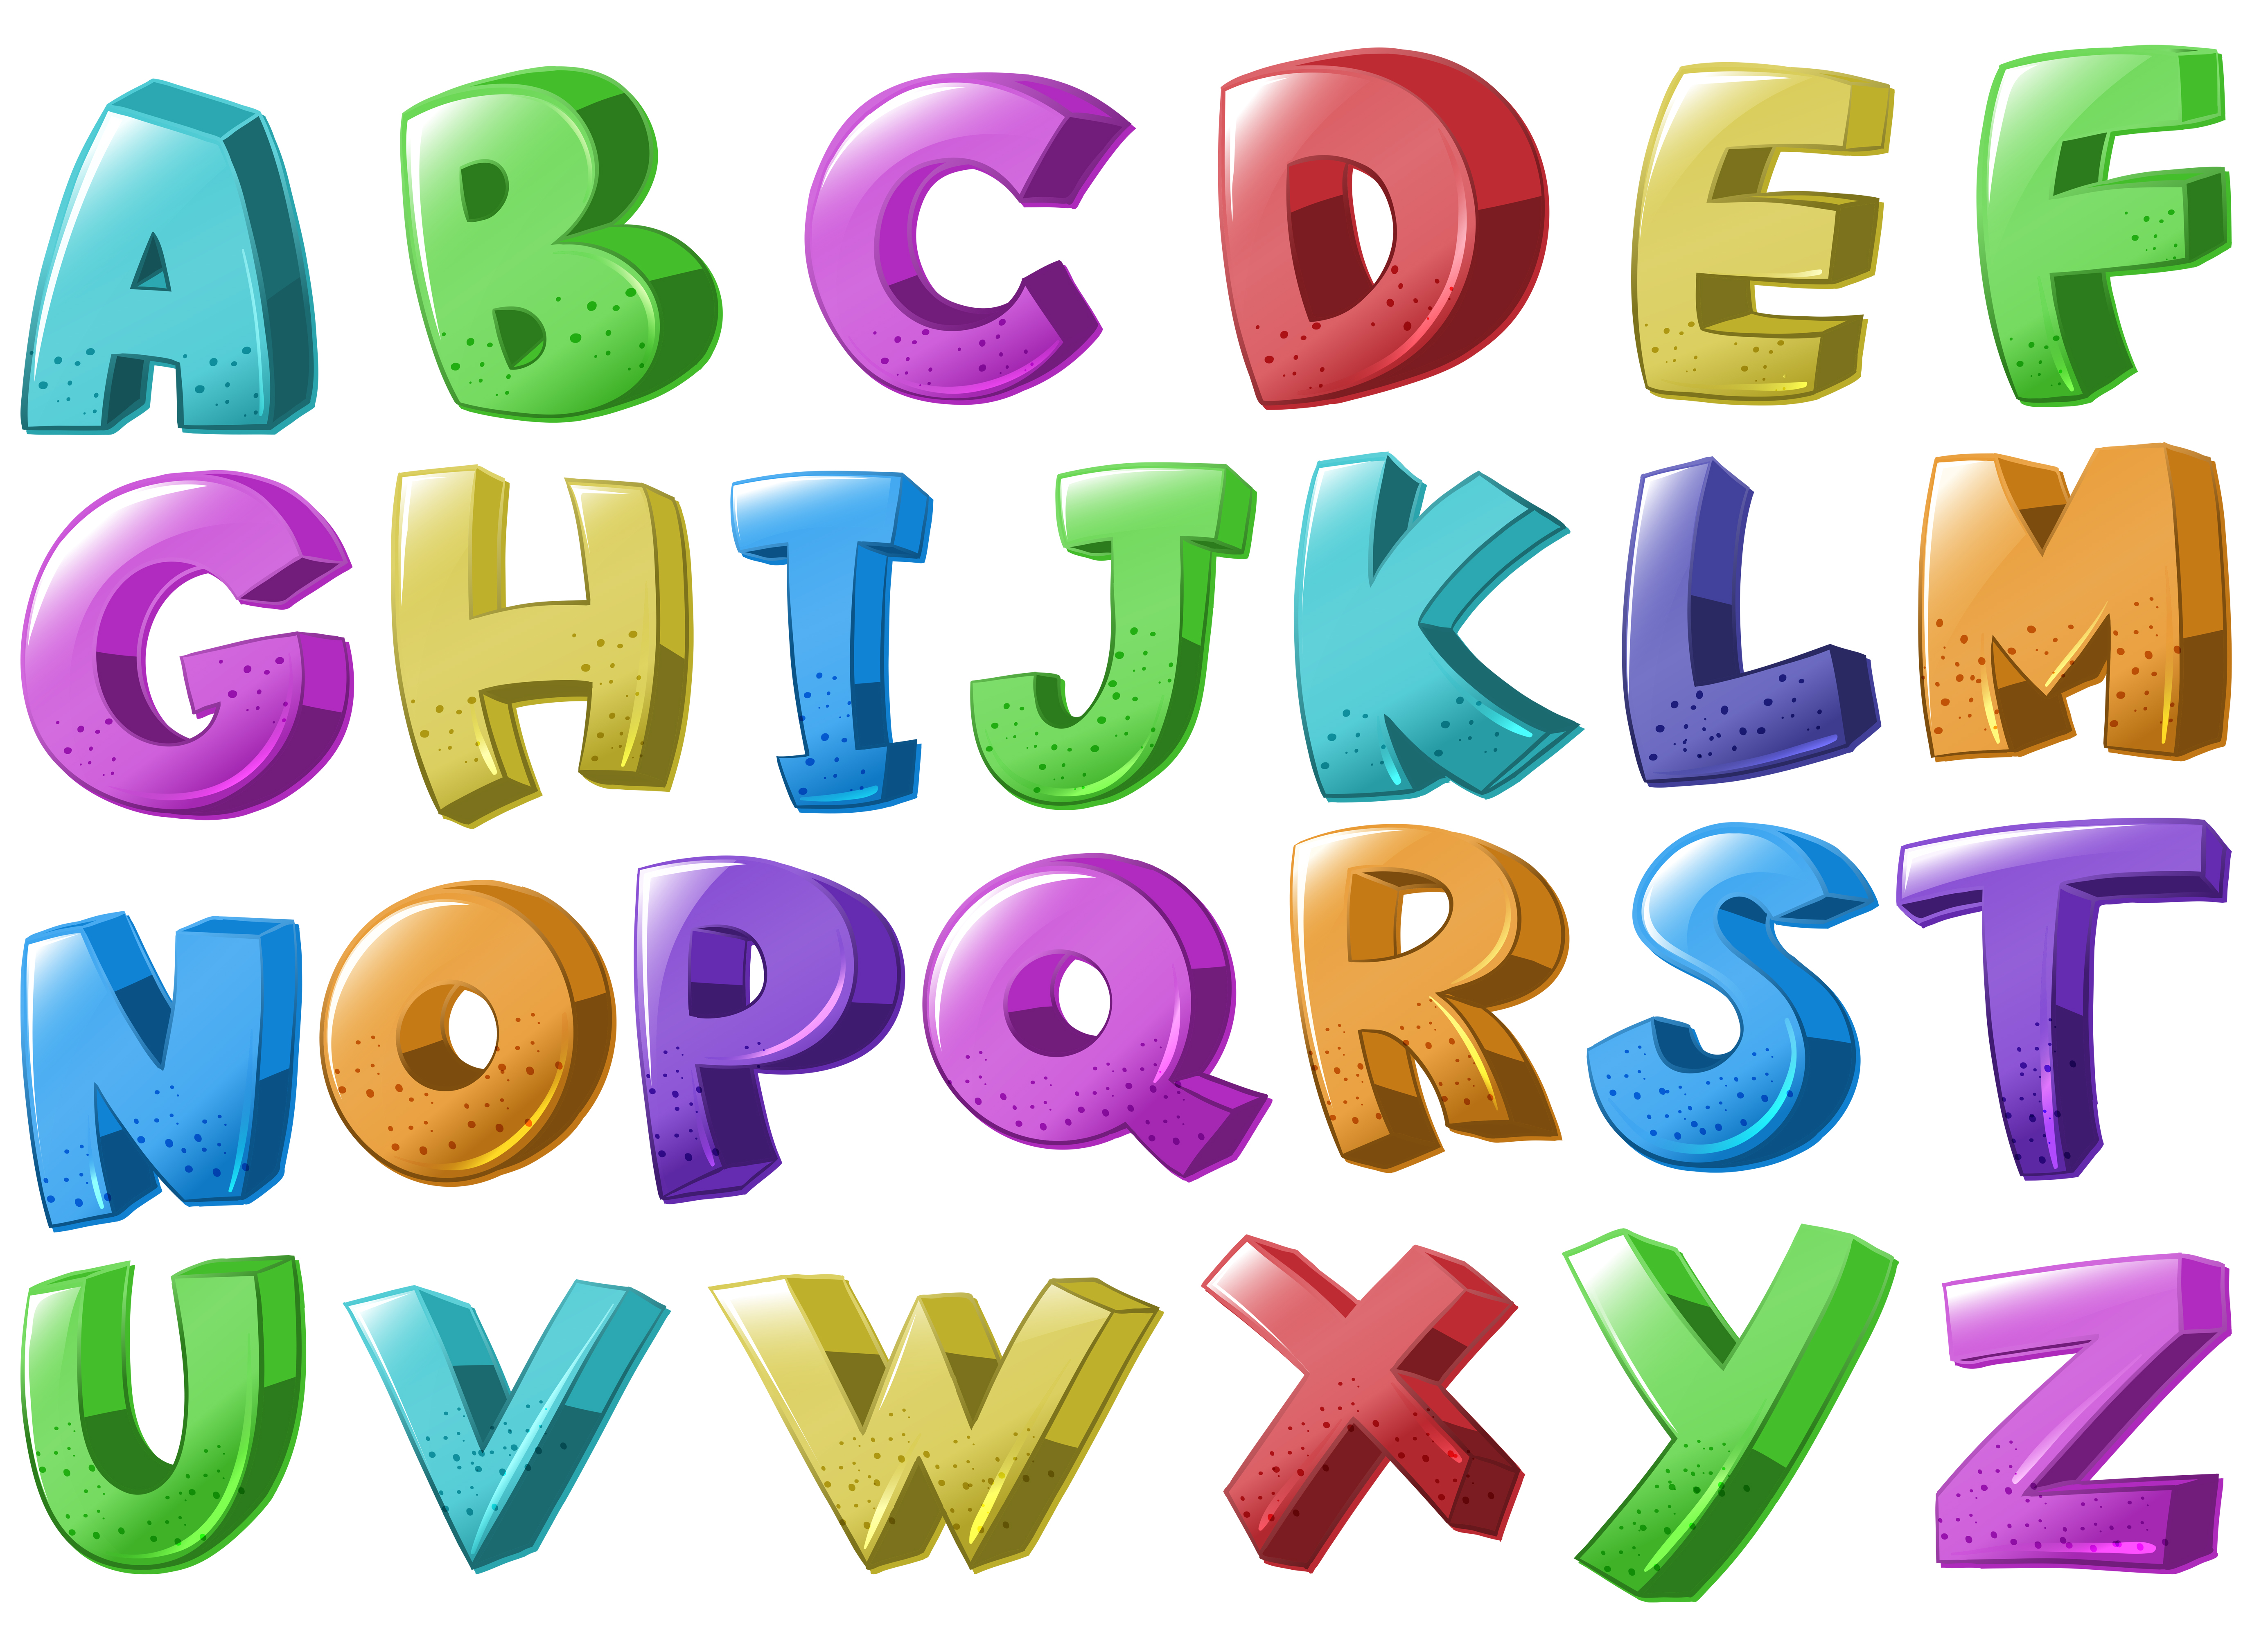 Font design with english alphabets - Download Free Vectors ...